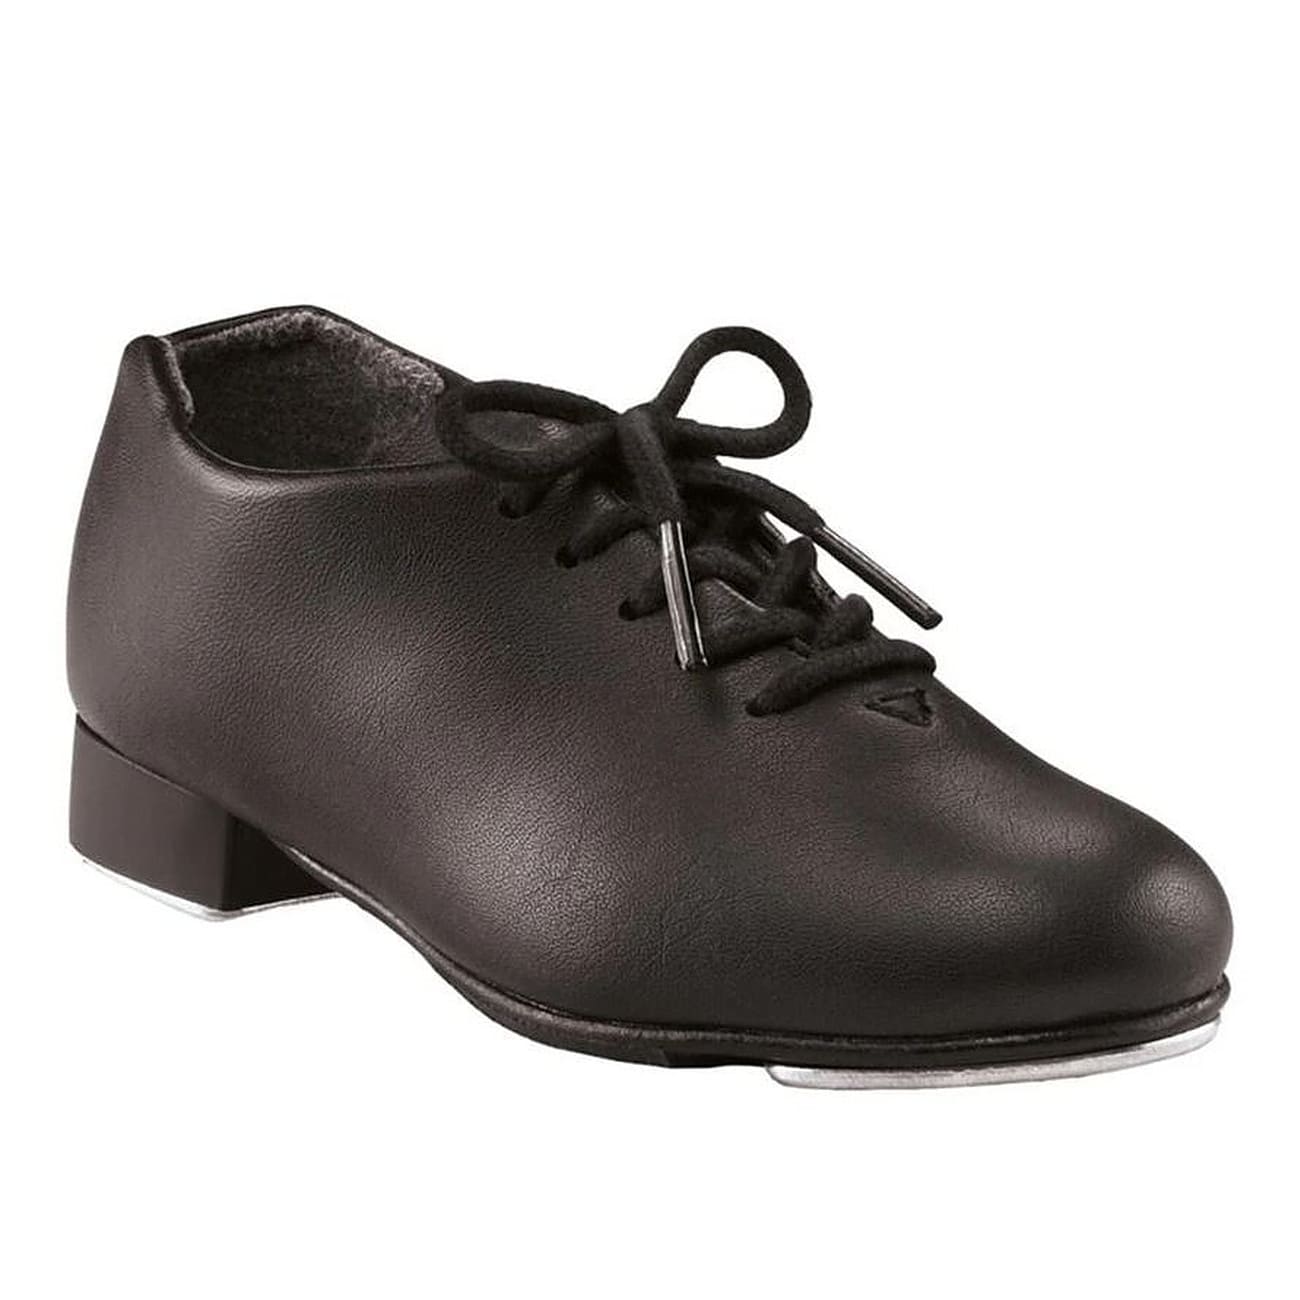 Capezio Shoes: Tapster black tap shoes - Turning Pointe